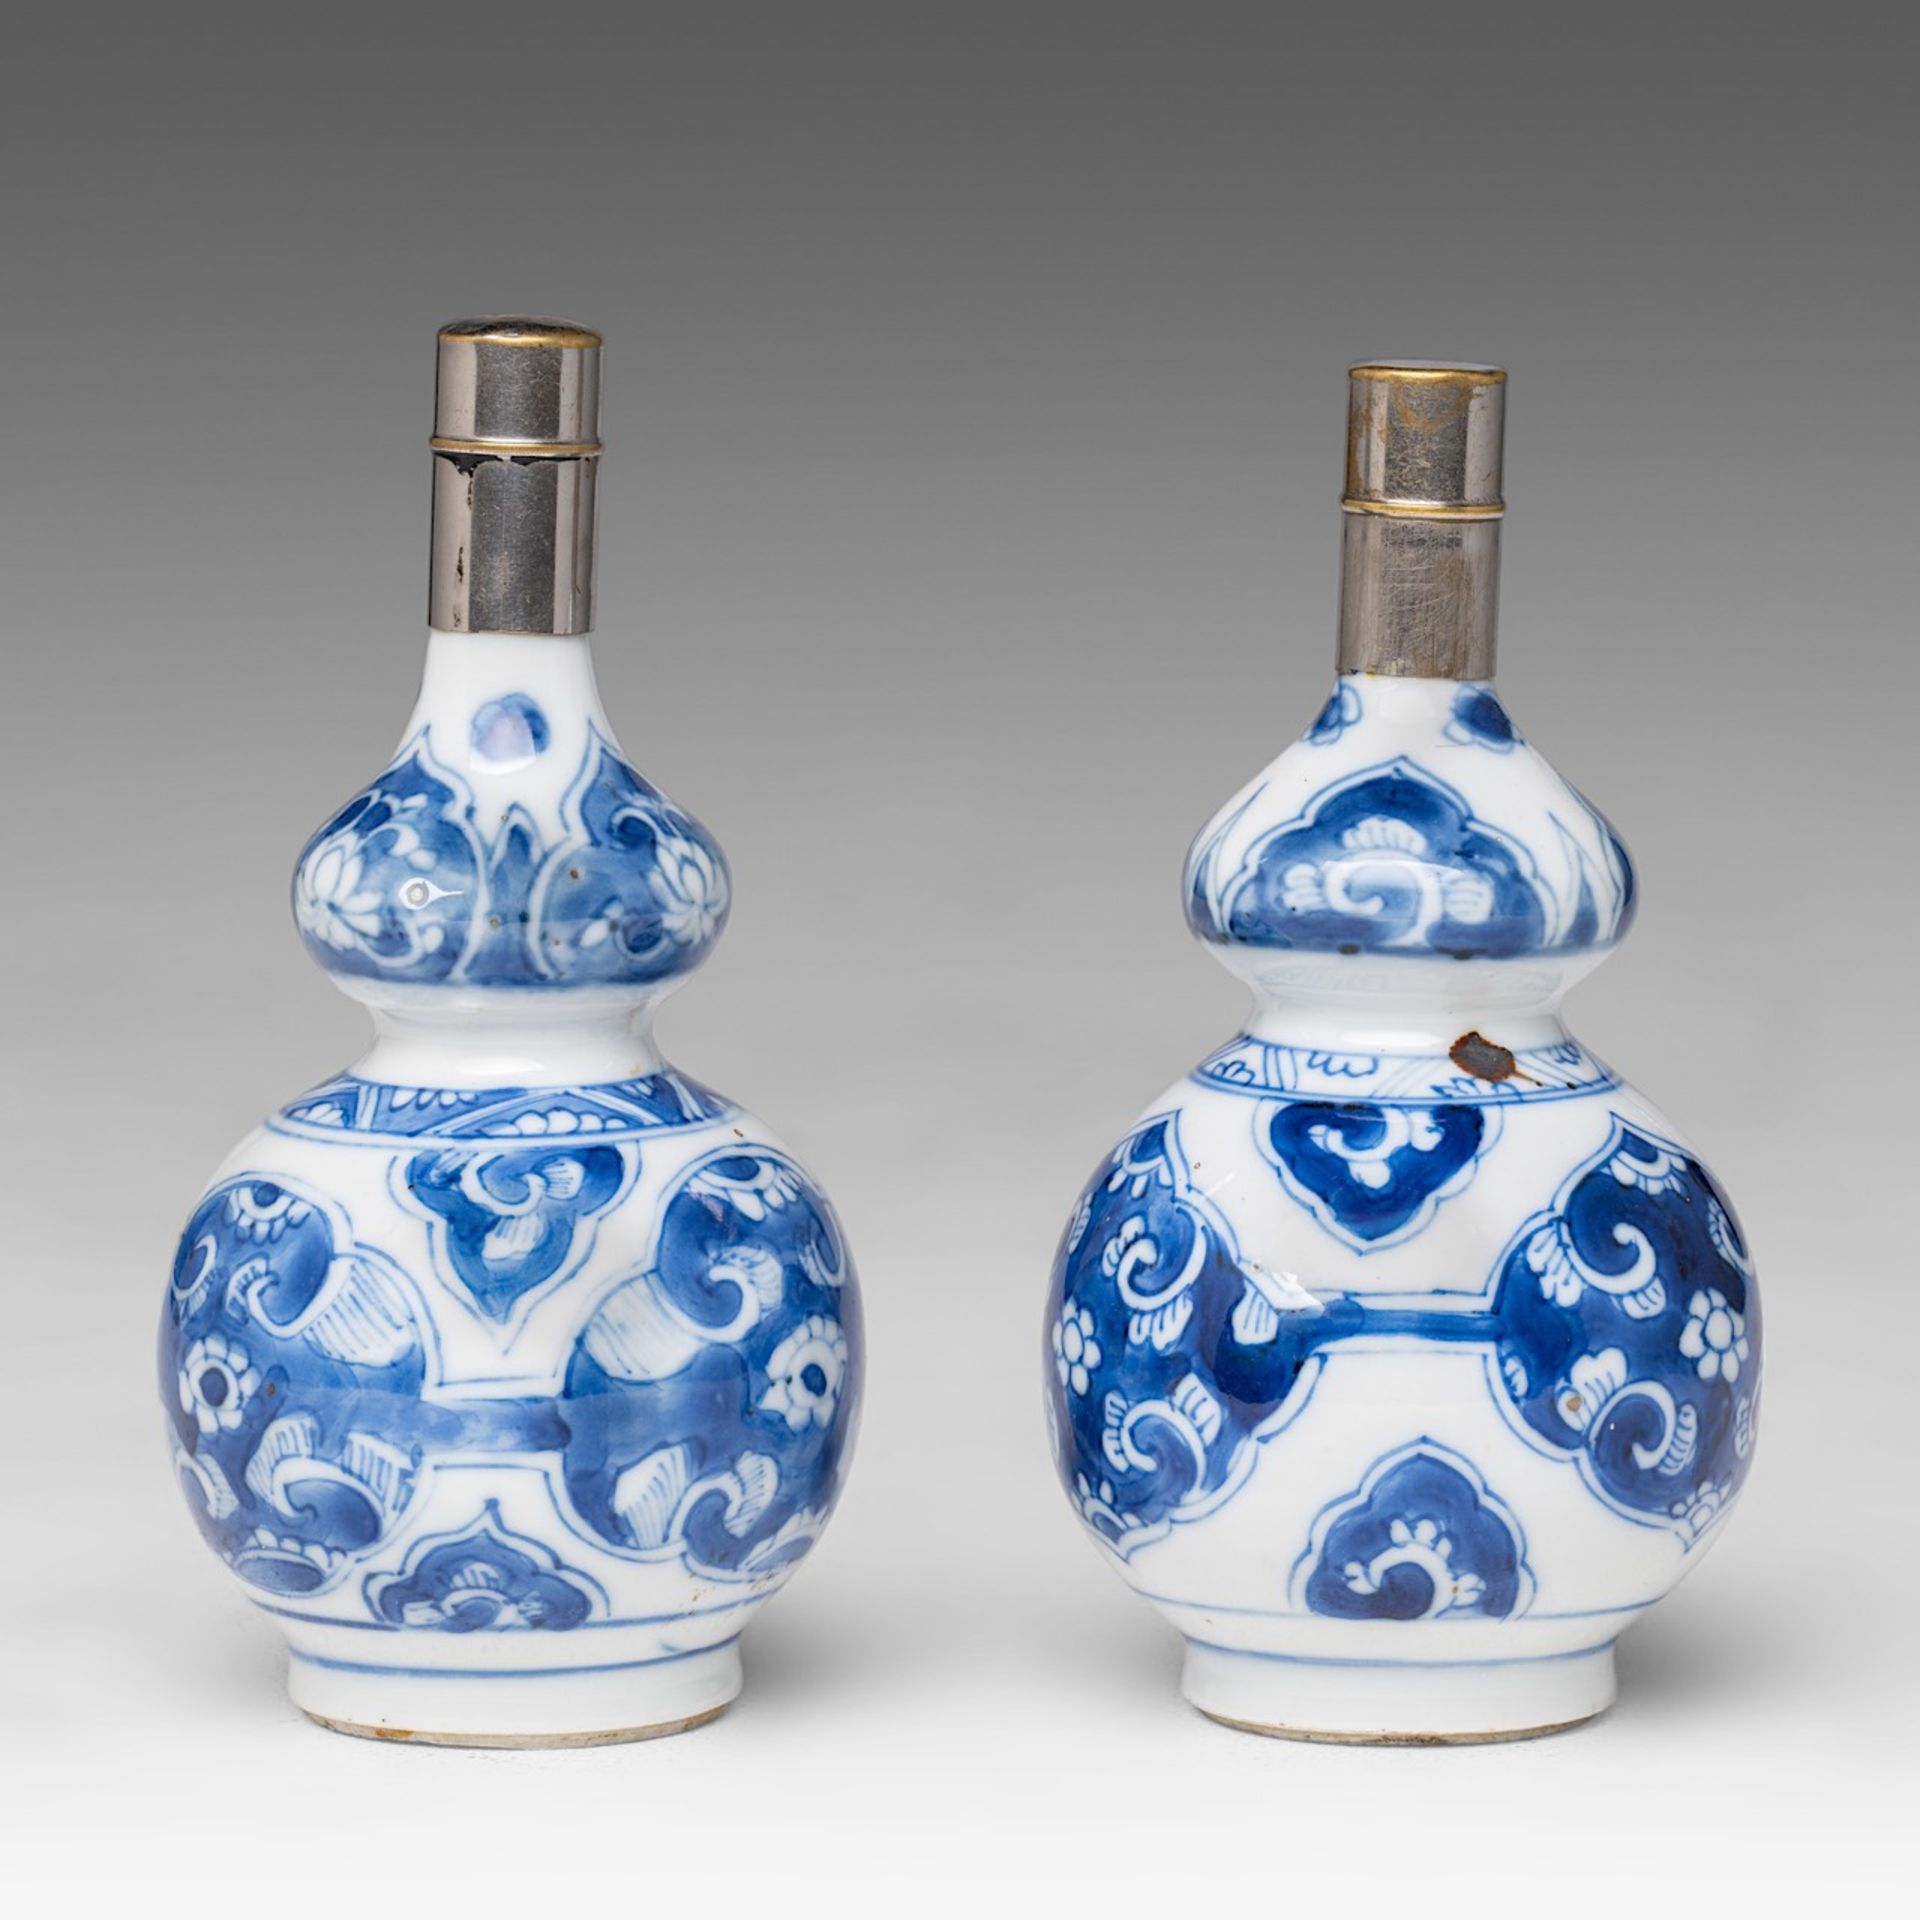 Two Chinese blue and white floral decorated double gourd vases, Kangxi period, H 13 cm - Image 4 of 6